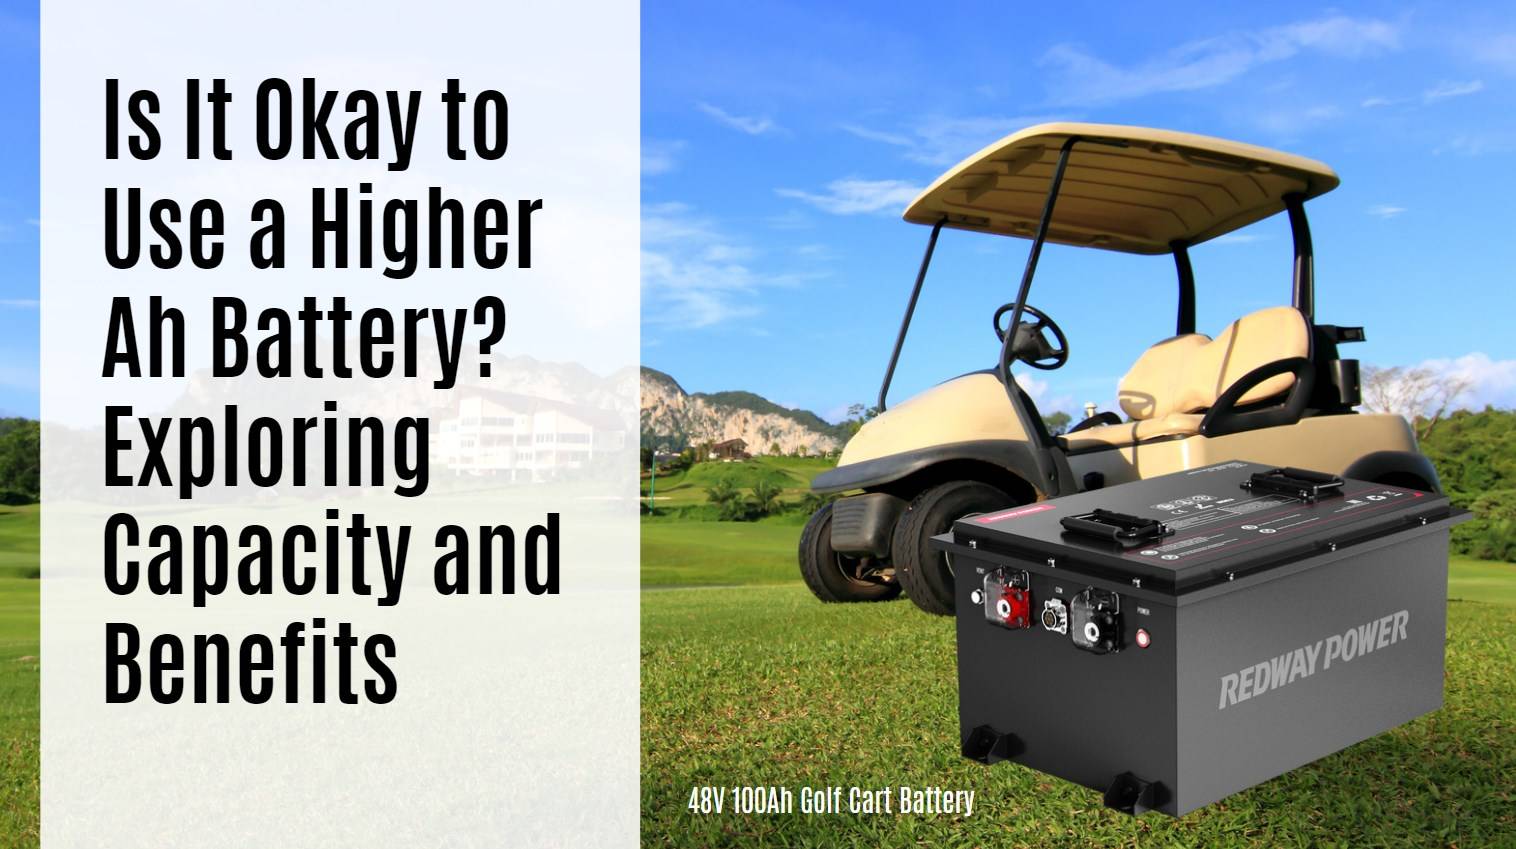 Is It Okay to Use a Higher Ah Battery? Exploring Capacity and Benefits. 48v 100ah golf cart battery CATL EVE cells redway